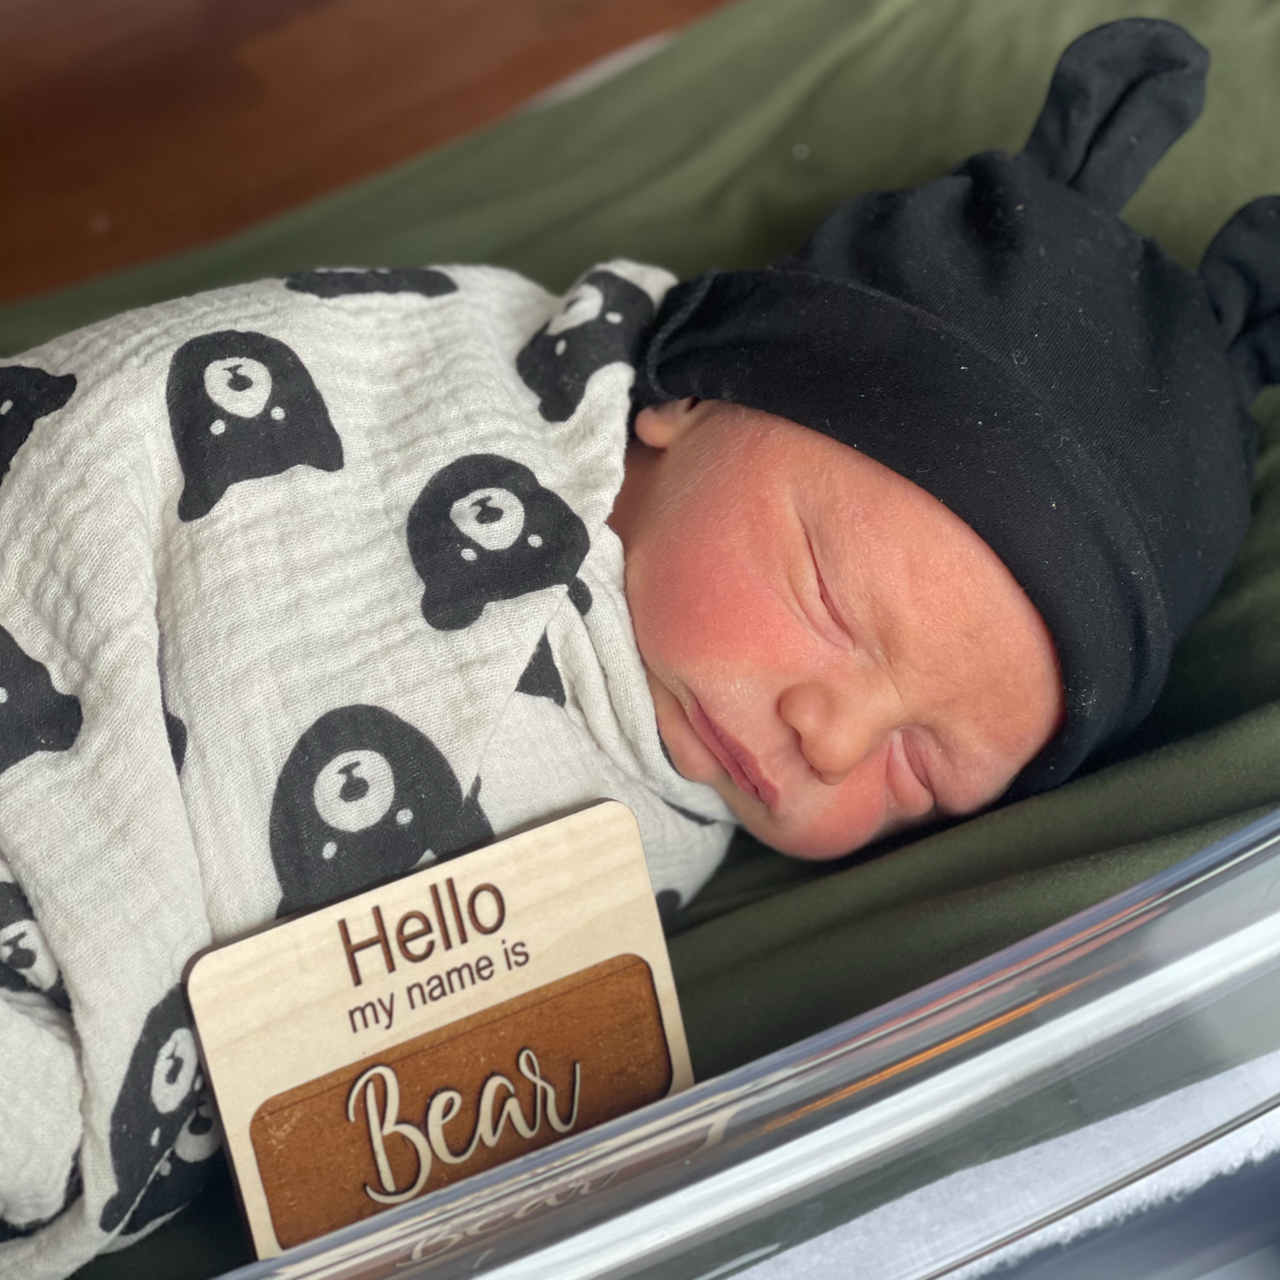 Baby Bear wears a bear hat and is wrapped in a bear swaddle.